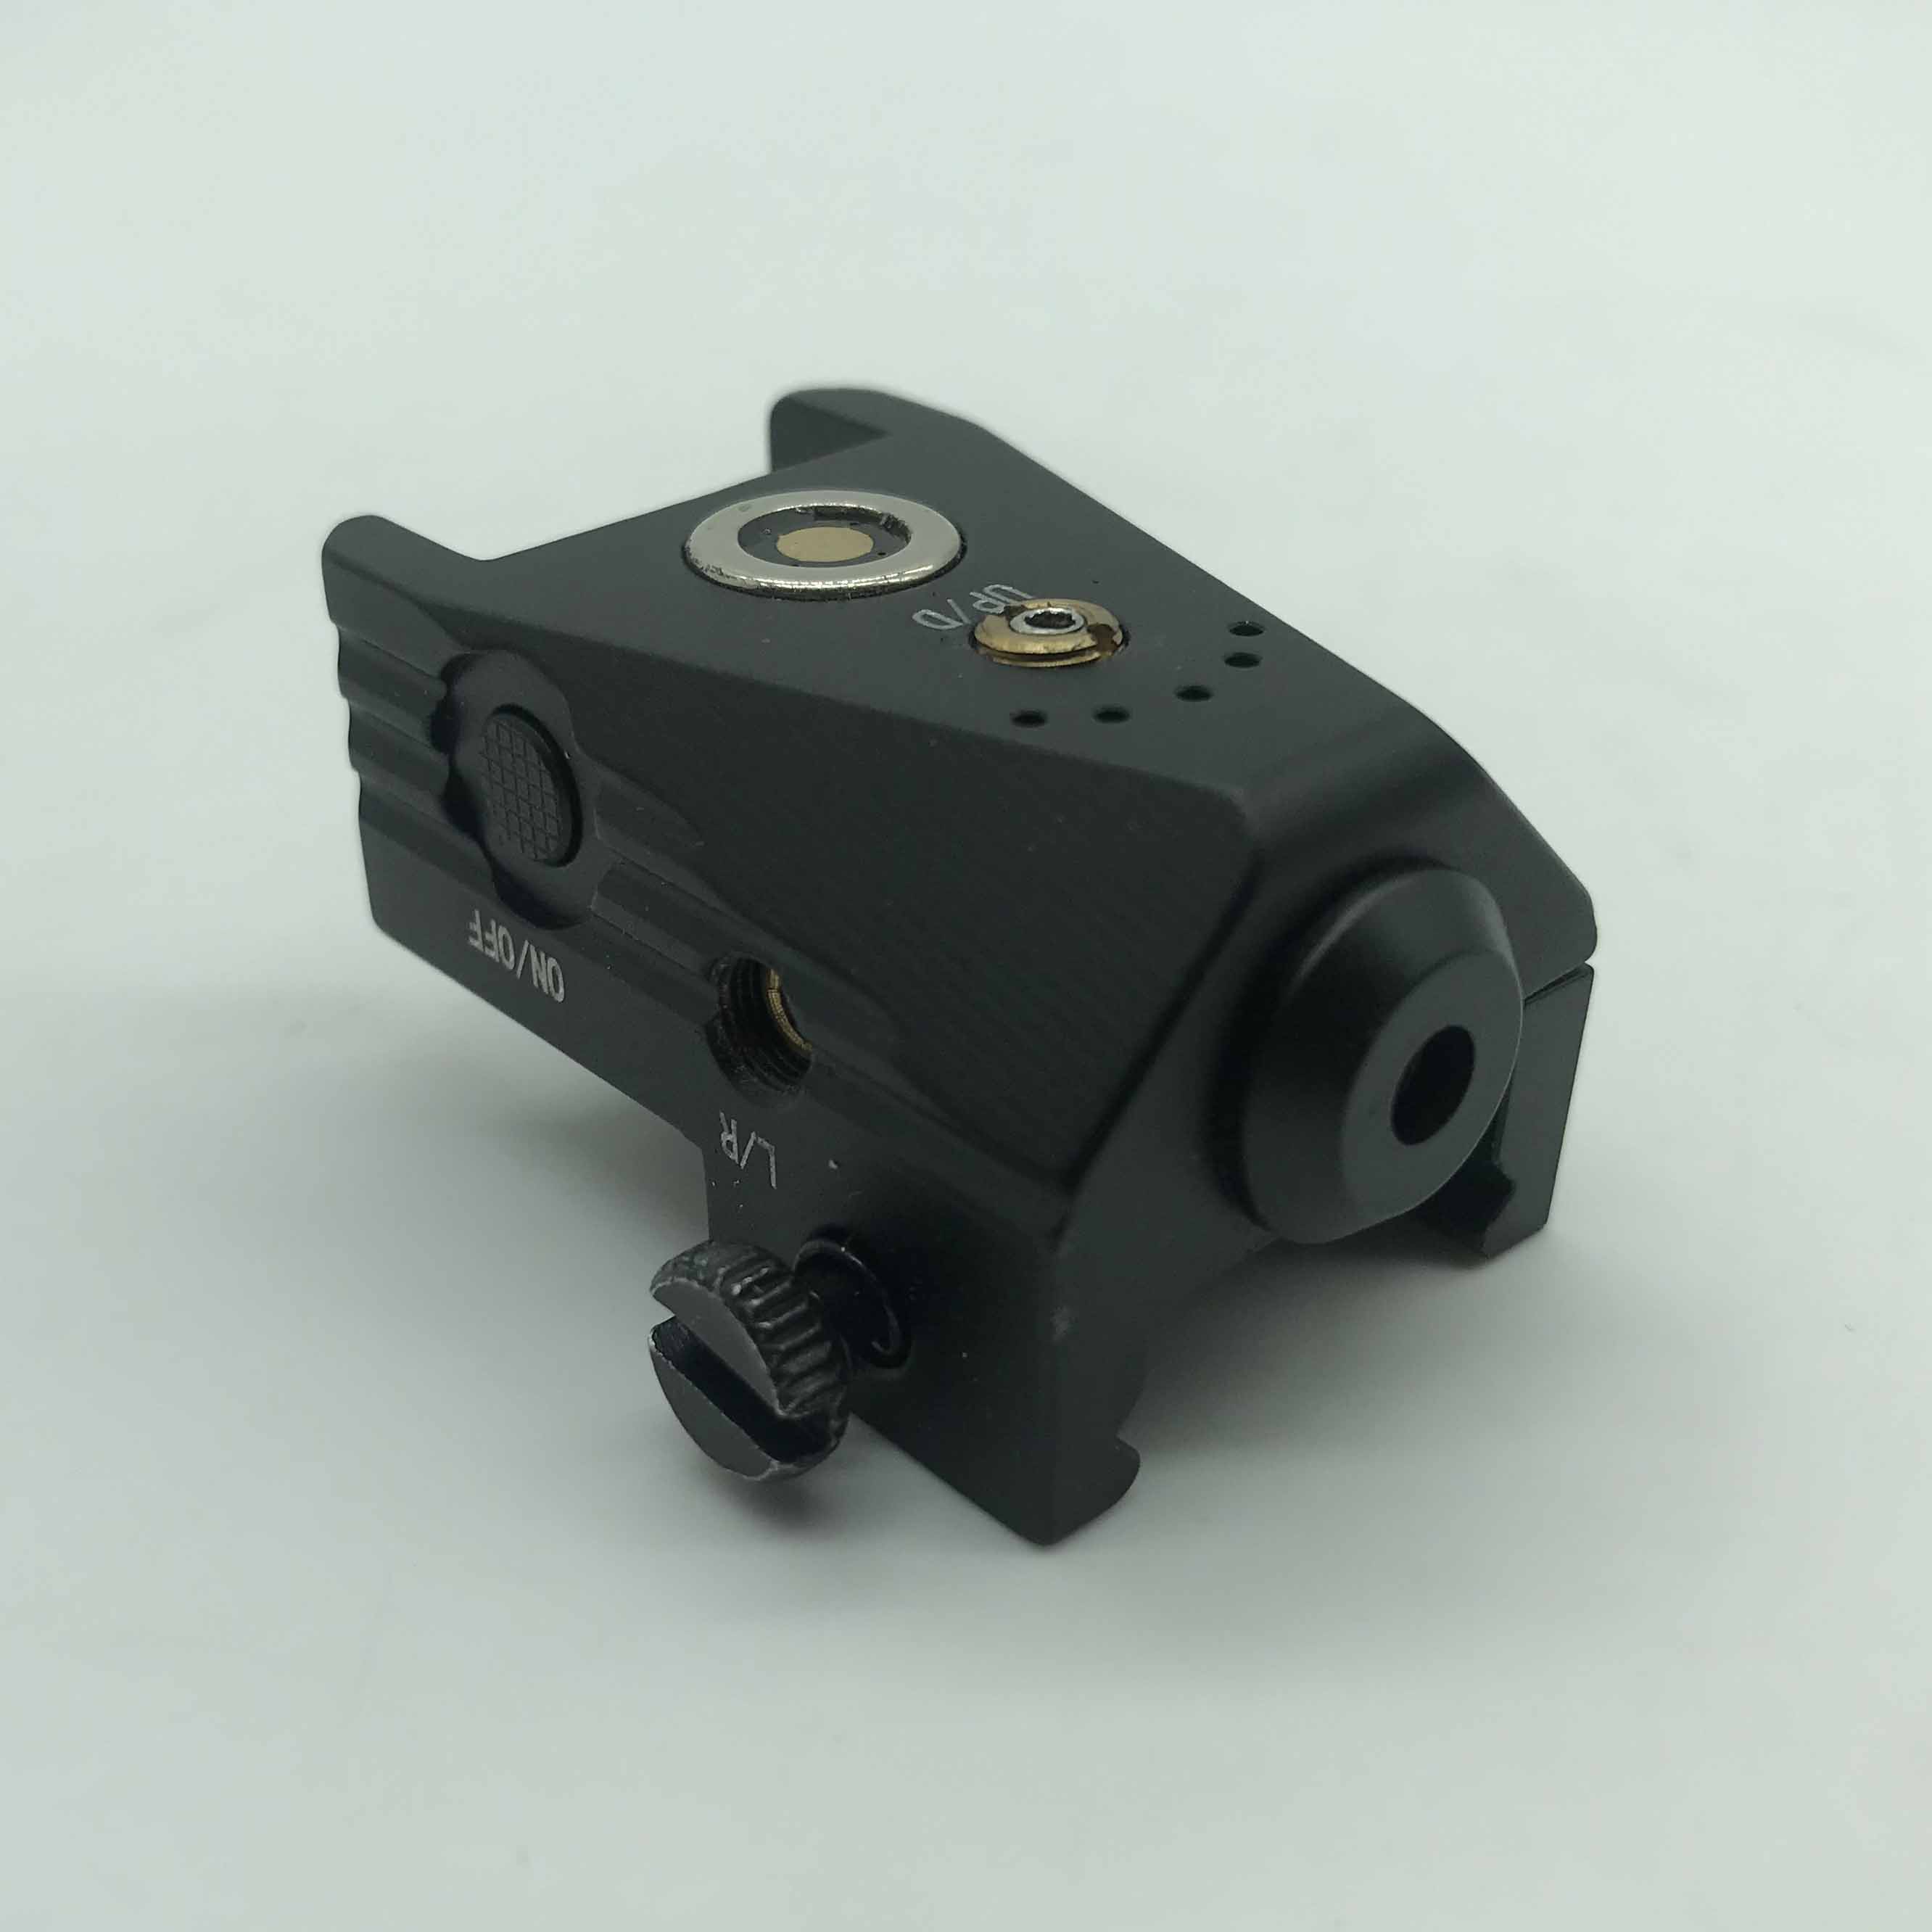 Firearm Laser Aiming Devices for Handguns and Pistols